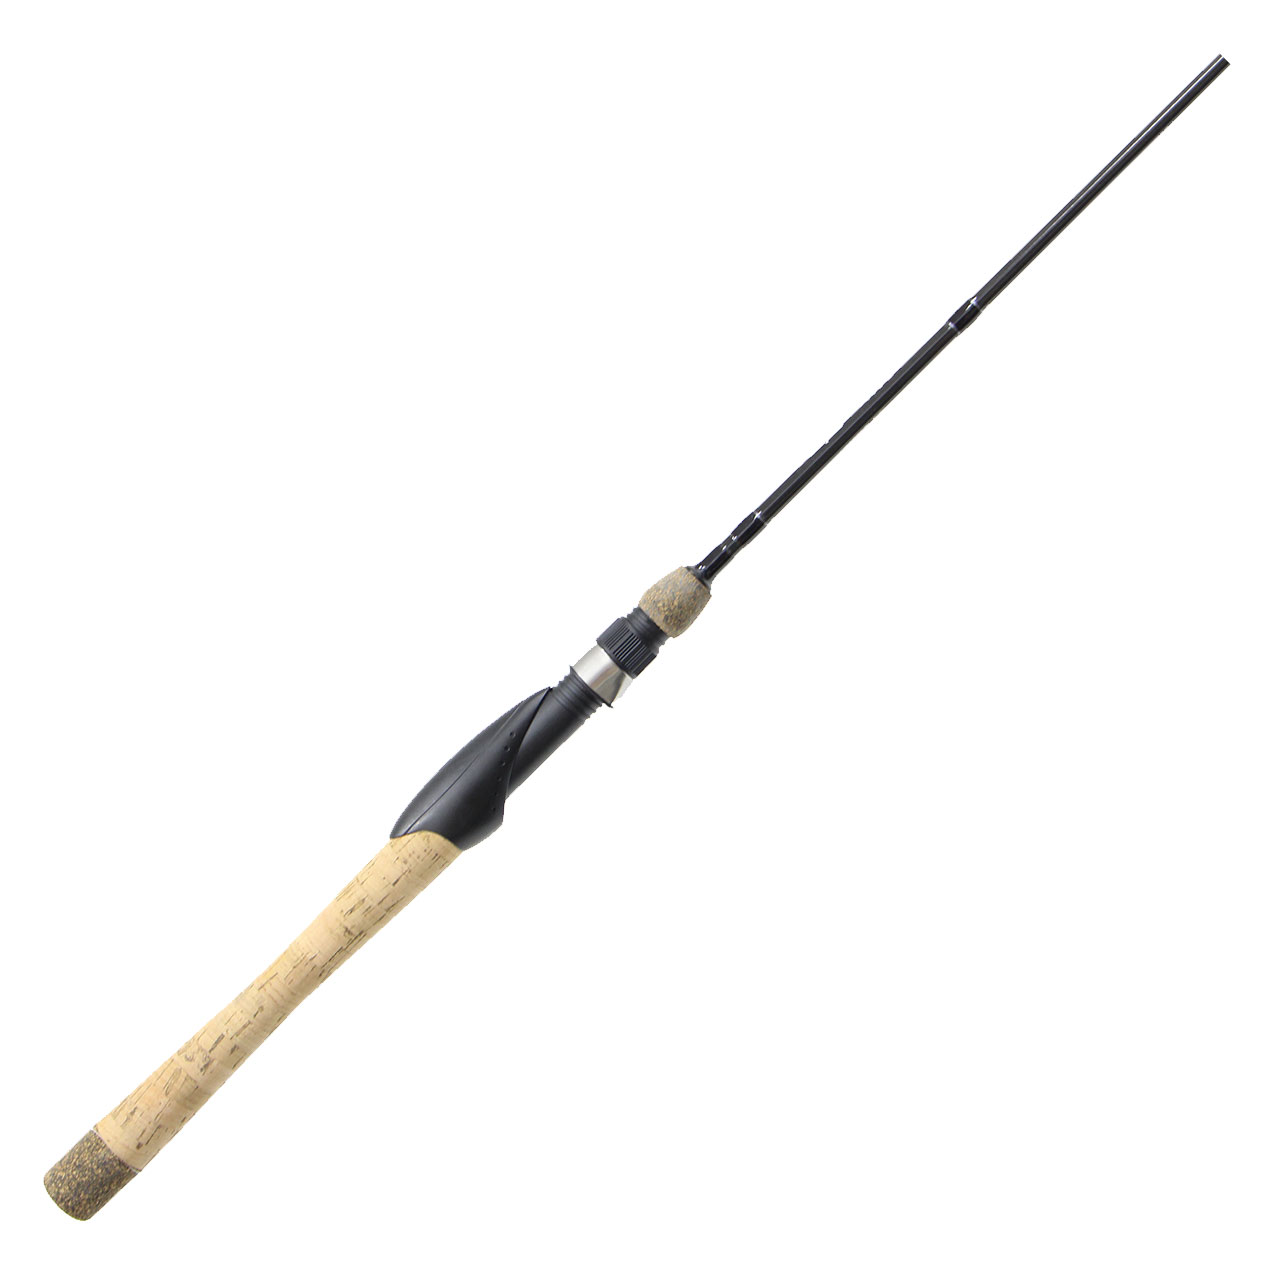 https://cdn11.bigcommerce.com/s-s2ydjd5yv9/images/stencil/original/products/1519/40347/X-11-Graphite-Freshwater-Spinning-Rod__40075.1668789010.jpg?c=1